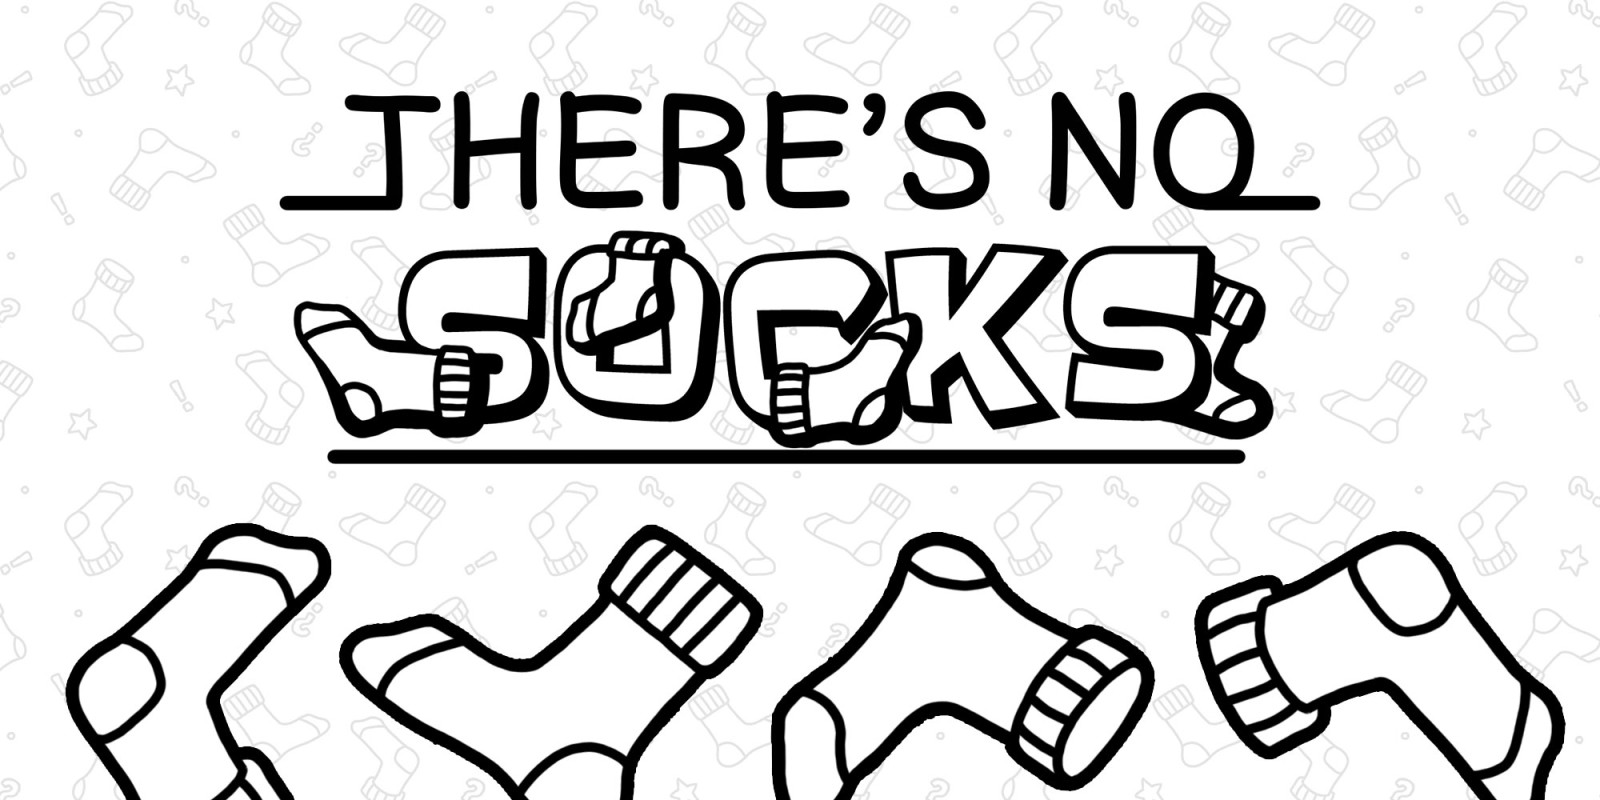 There's no Socks